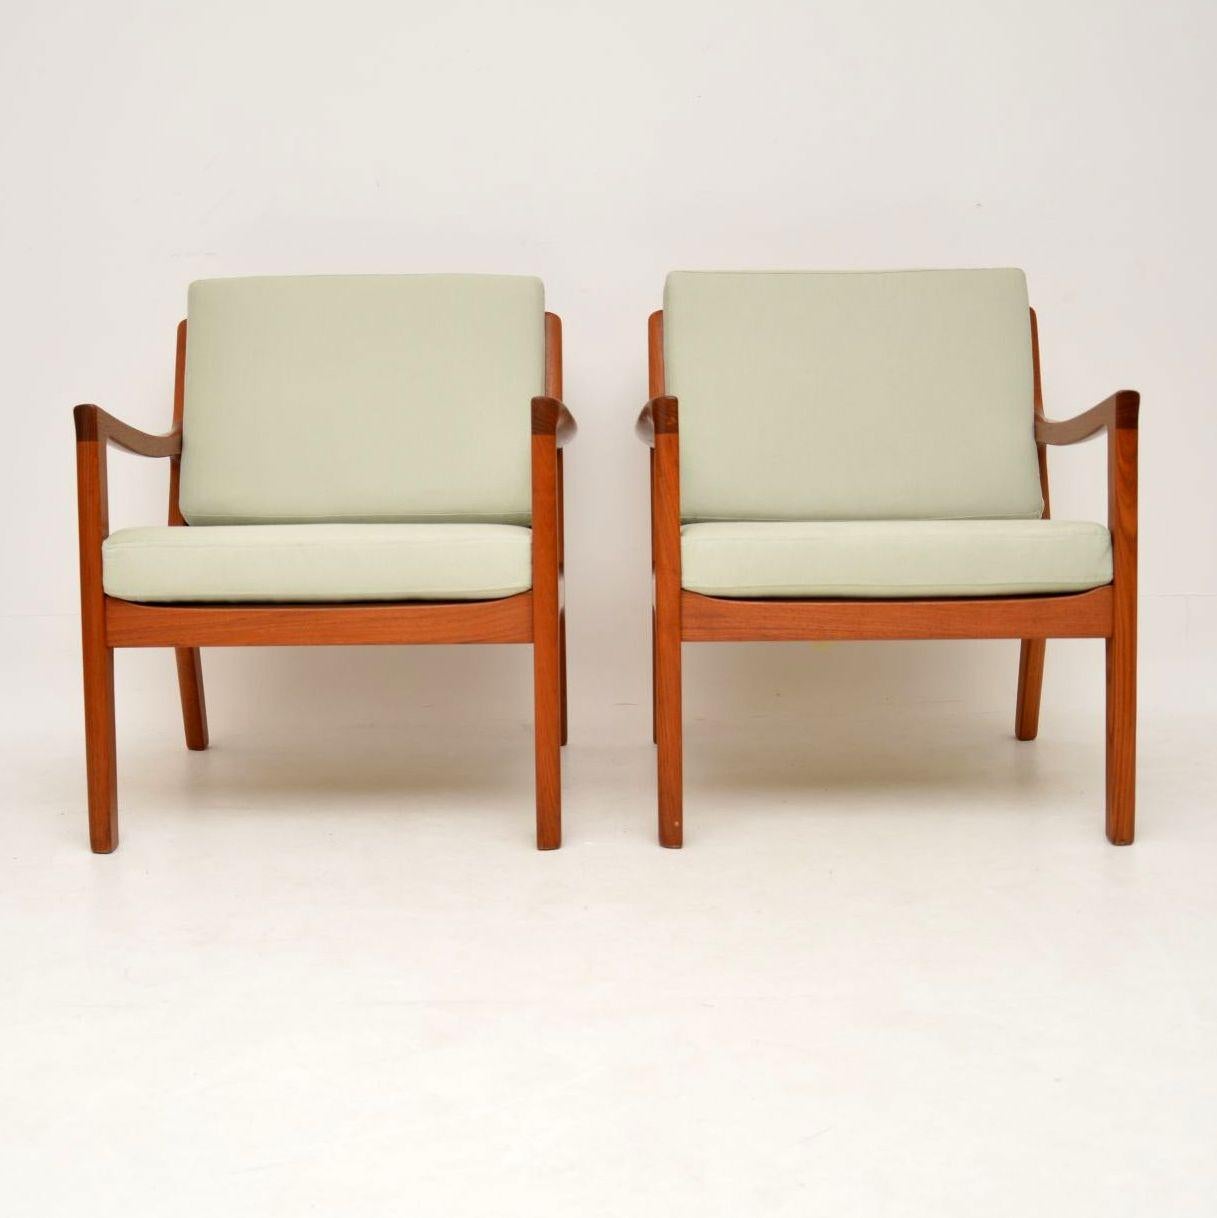 A stunning pair of Danish armchairs in solid teak, this model is called the ‘Senator’, it was designed by Ole Wanscher and was made by Cado in the 1960s-1970s. They are in excellent condition for their age, the teak frames are clean, sturdy and